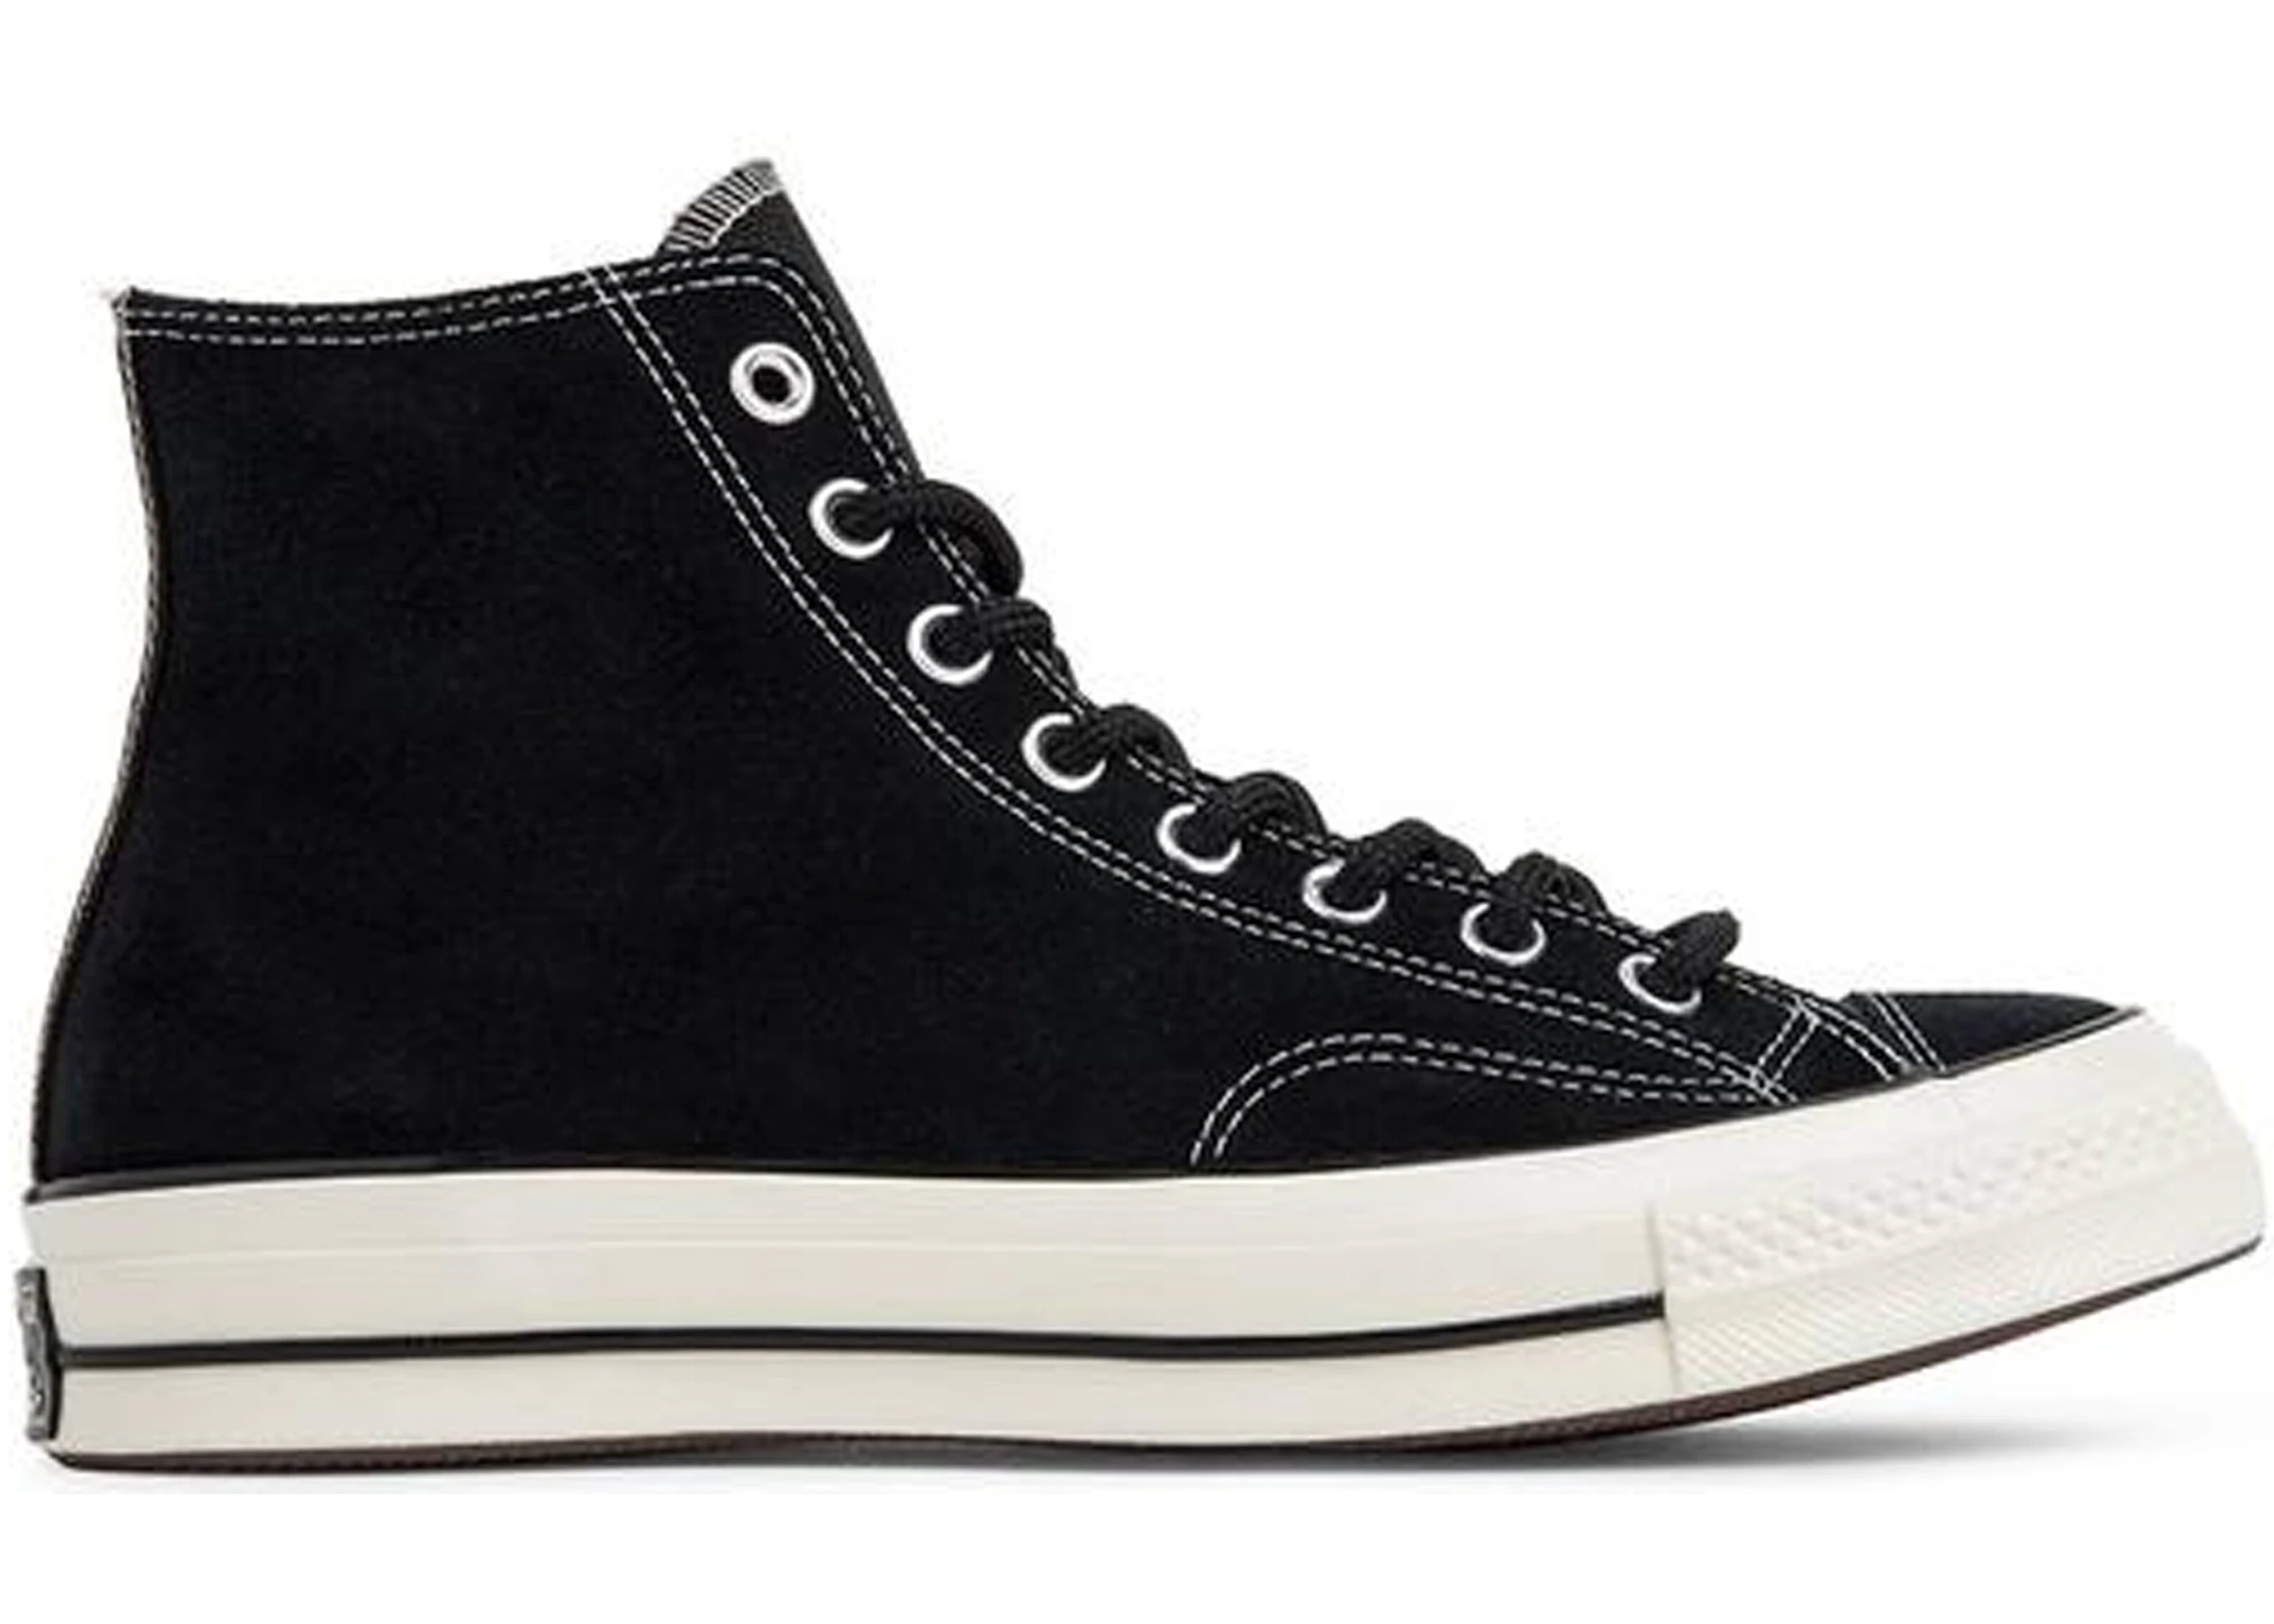 Converse Chuck Taylor All-Star 70 Hi Suede Pack Black - 162373C - US